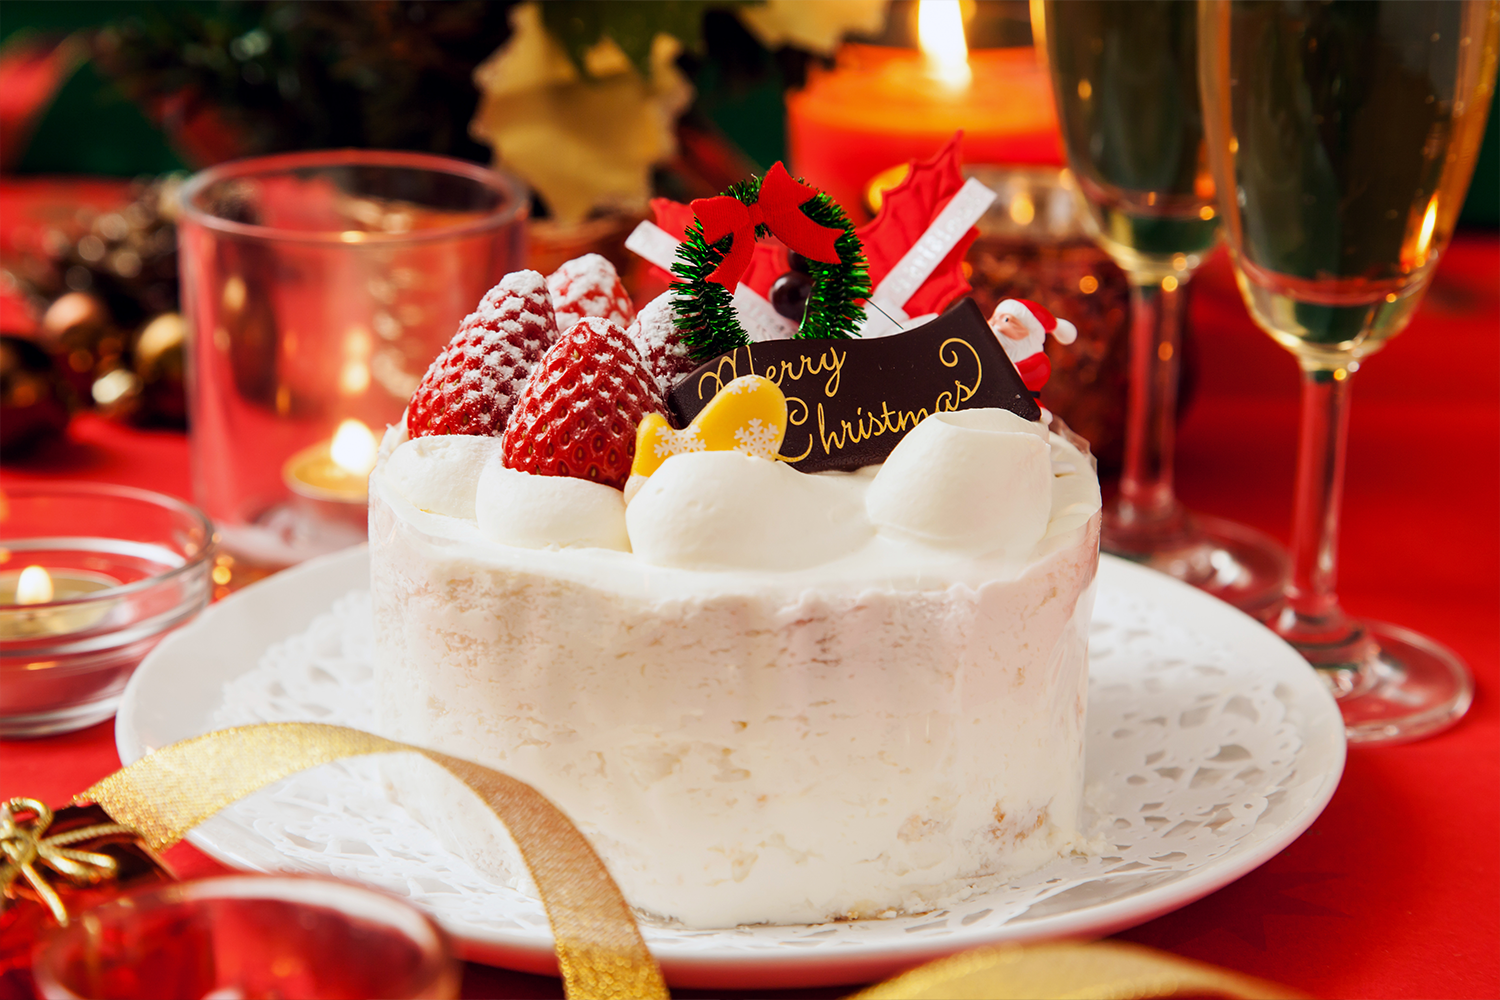 A Christmas cake from Japan sits on a brightly decorated table.